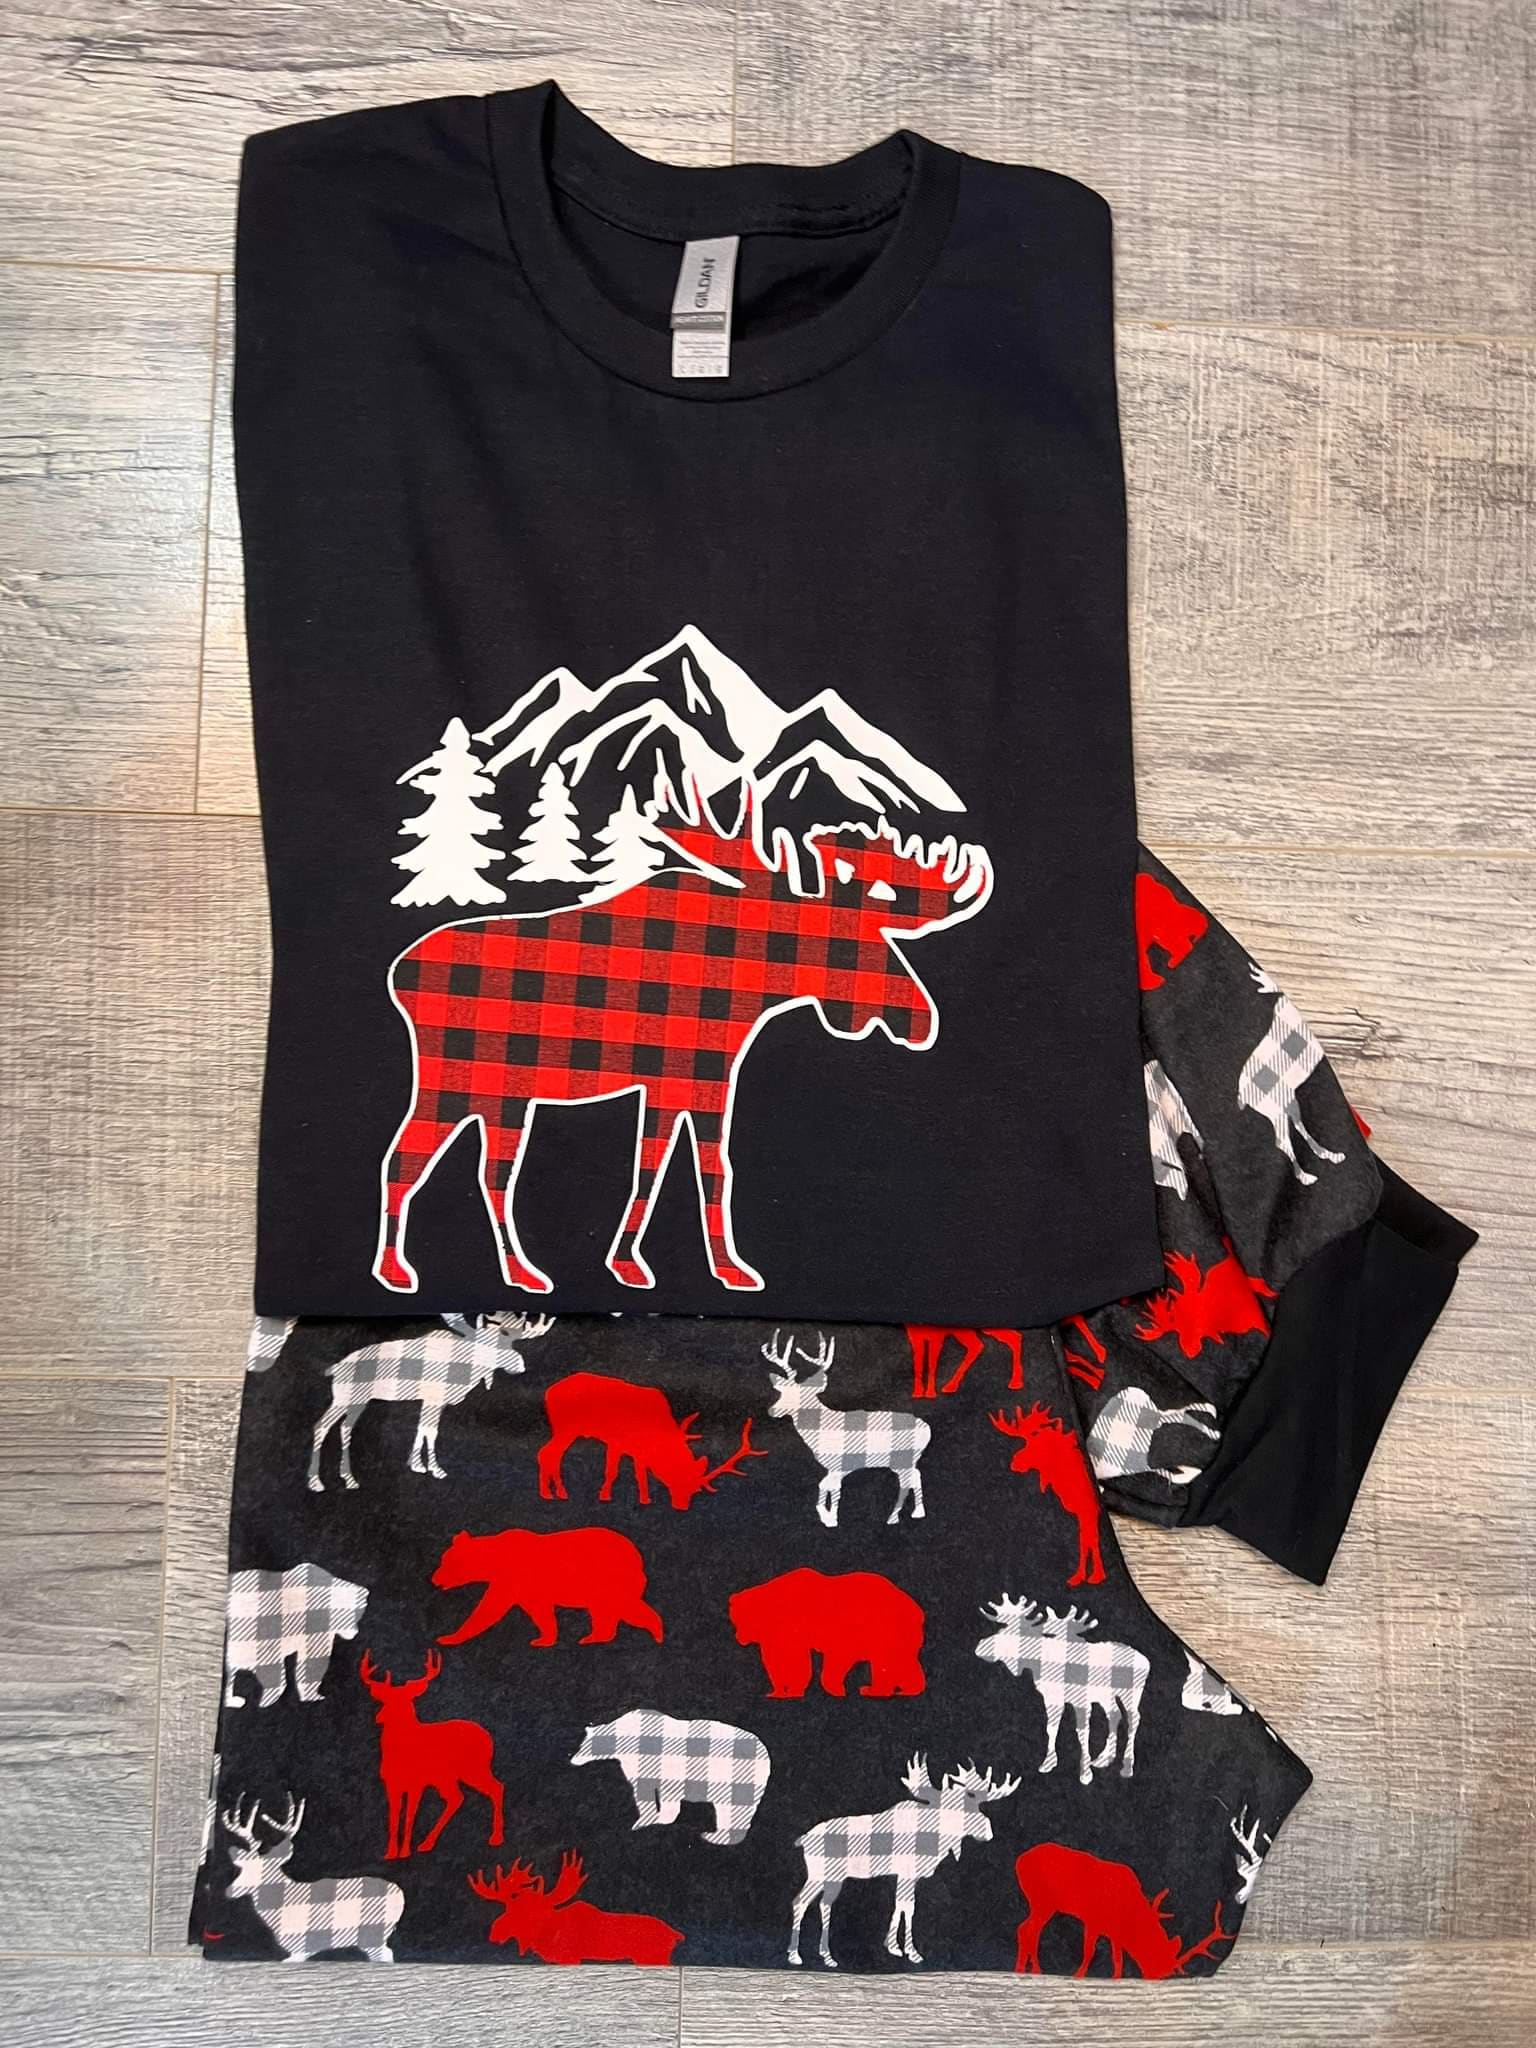 Canadian Moose PJs - Matching Pajamas for Adults, Kids, Dolls and Dog